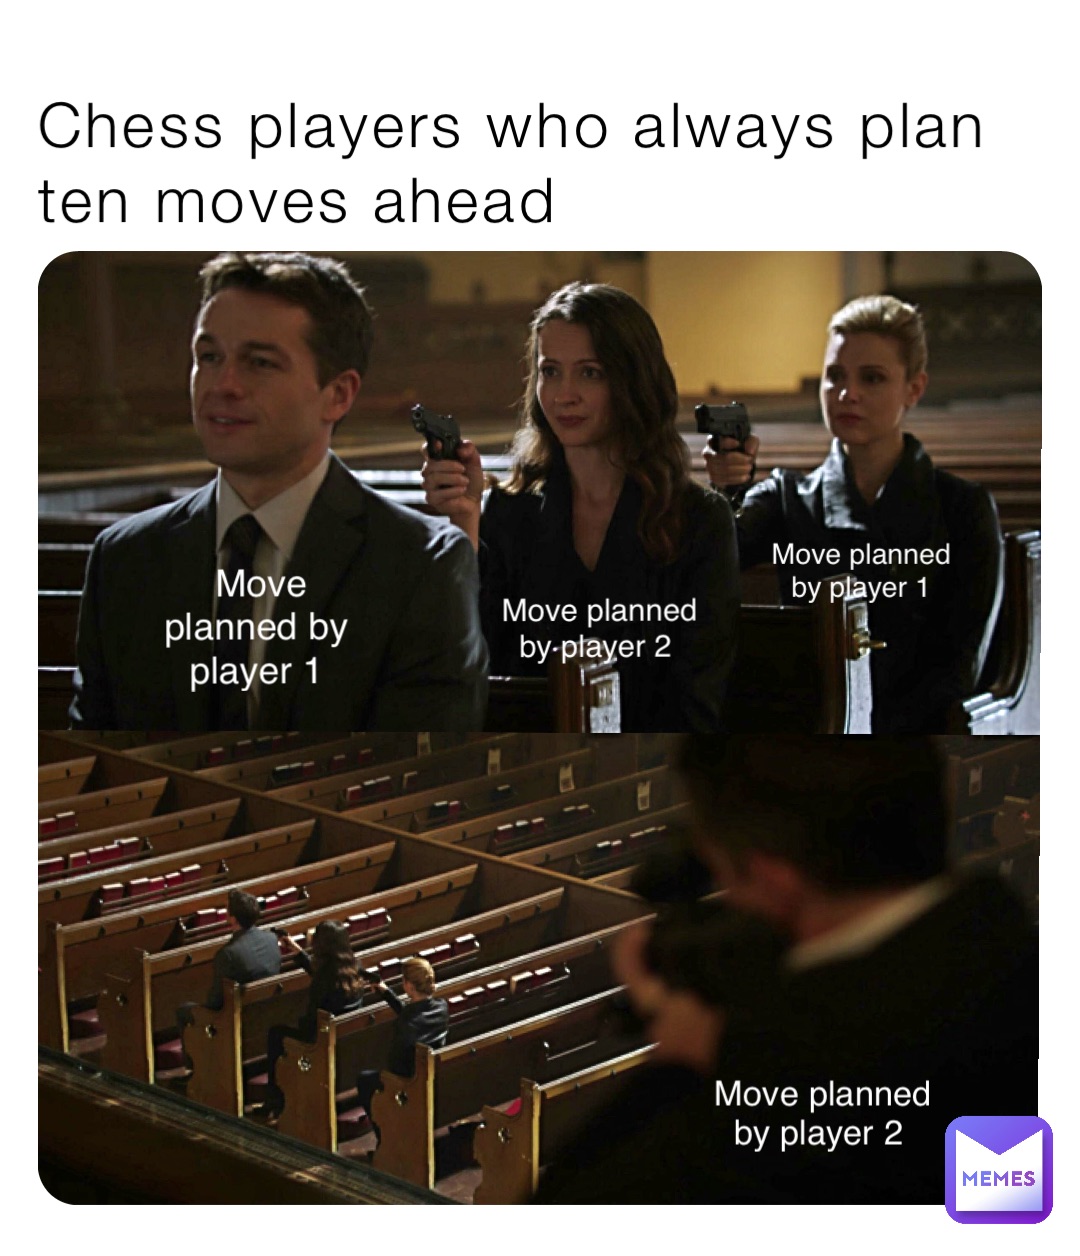 Chess players who always plan ten moves ahead Move planned by
player 1 Move planned 
by player 2 Move planned
by player 1 Move planned 
by player 2